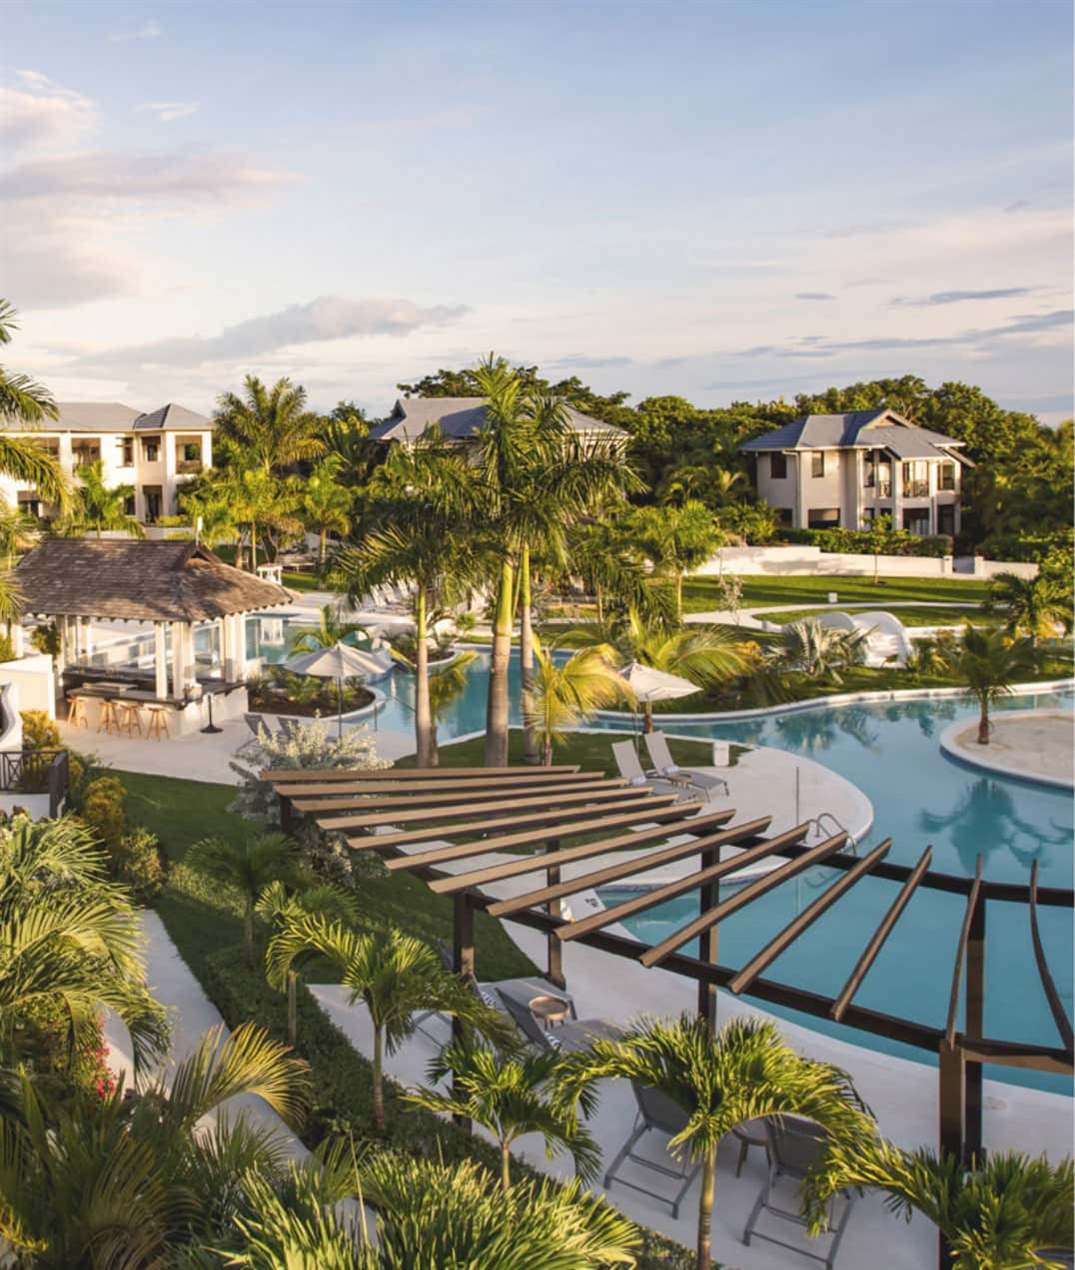 20% Winter Savings Offer 2023 | The Cliff Hotel in Caribbean